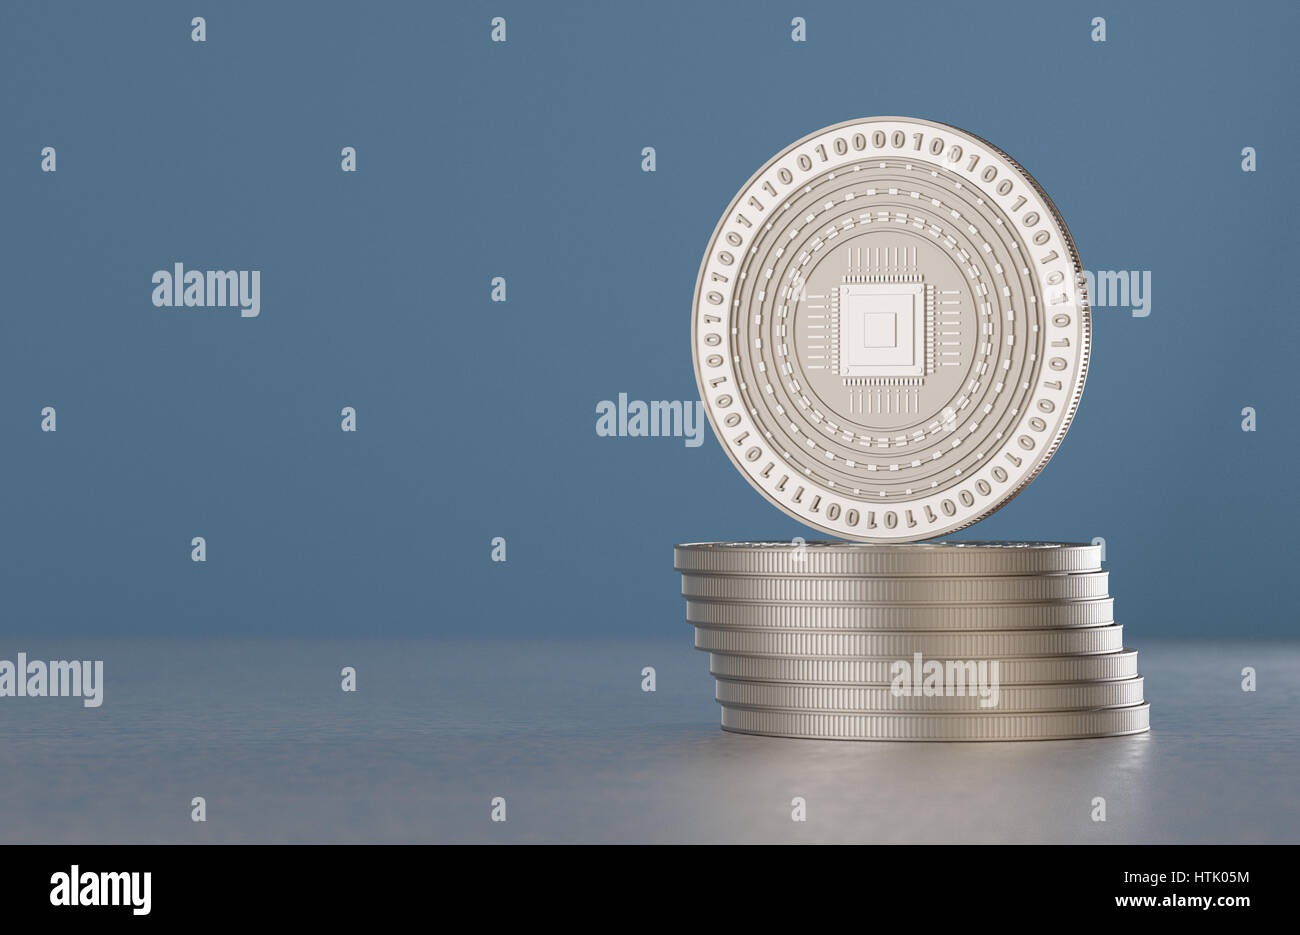 Stack of silver crypto-currency coins with cpu symbol as example for digital currency, online banking or fin-tech Stock Photo